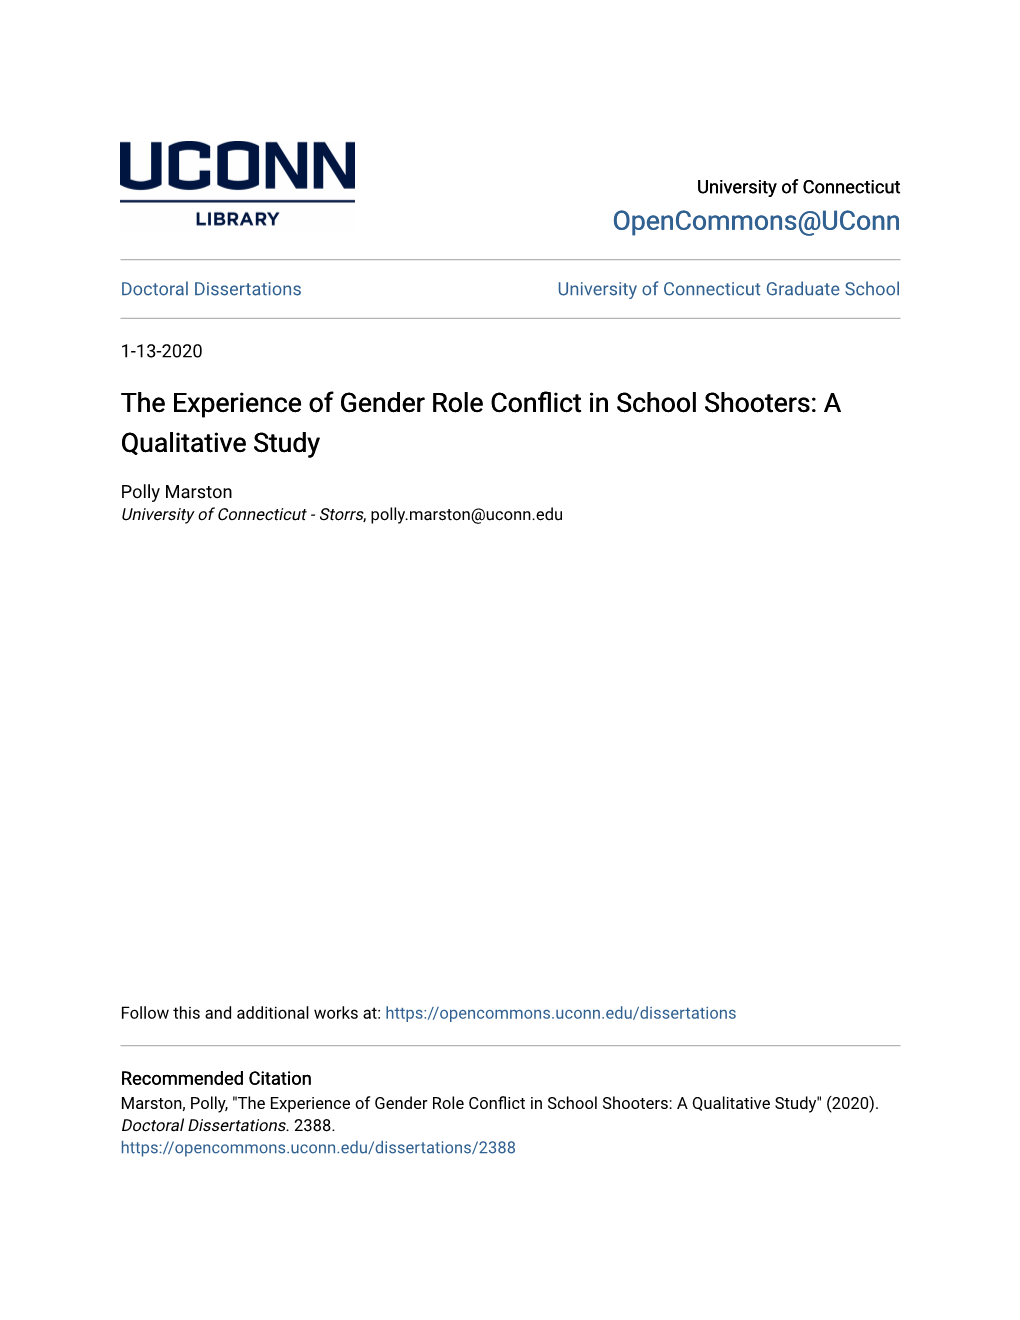 The Experience of Gender Role Conflict in School Shooters: a Qualitative Study